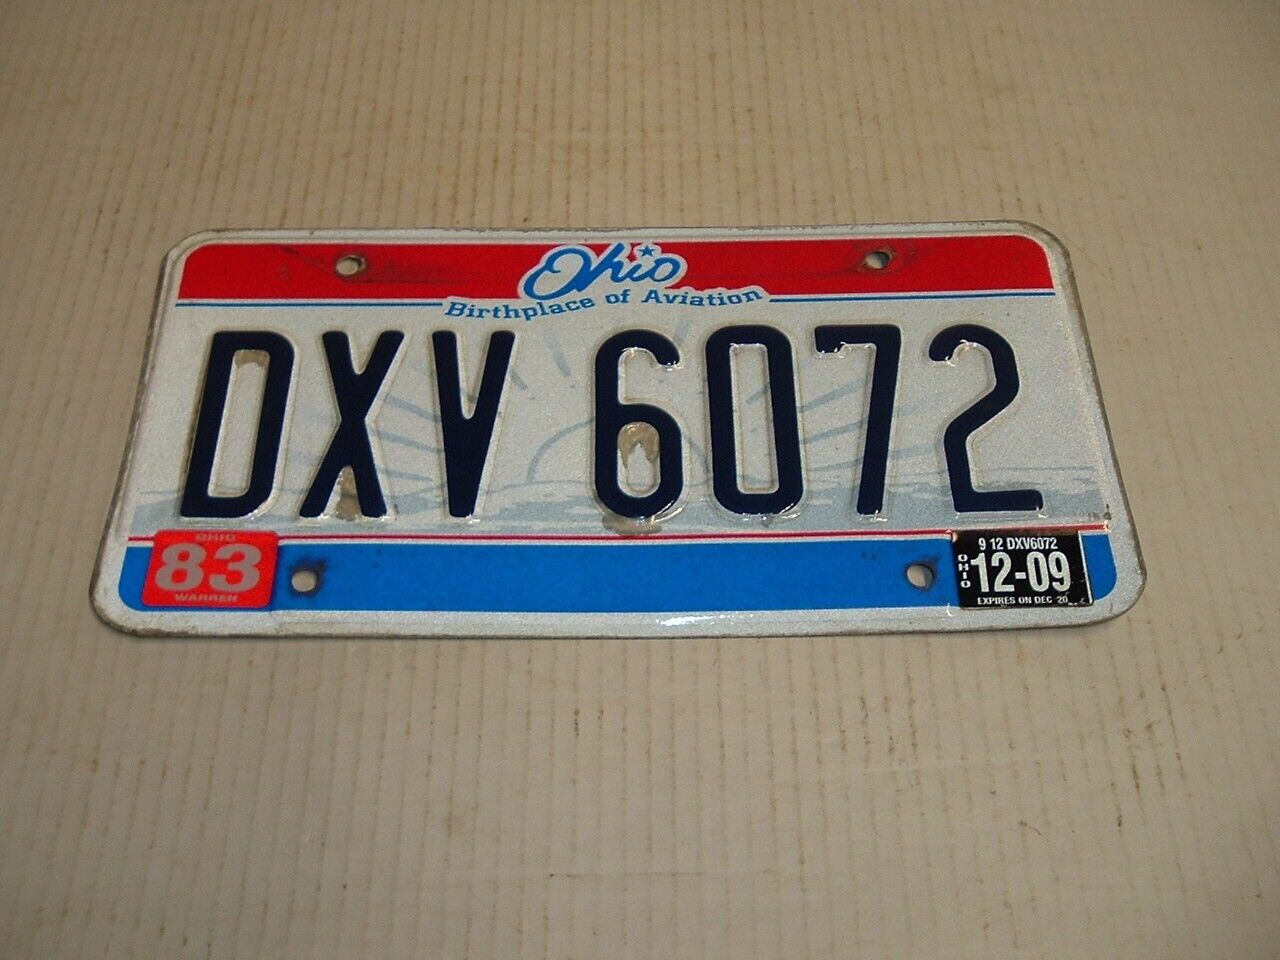 Ohio Birthplace of Aviation 2009 License Plate DXV 6072